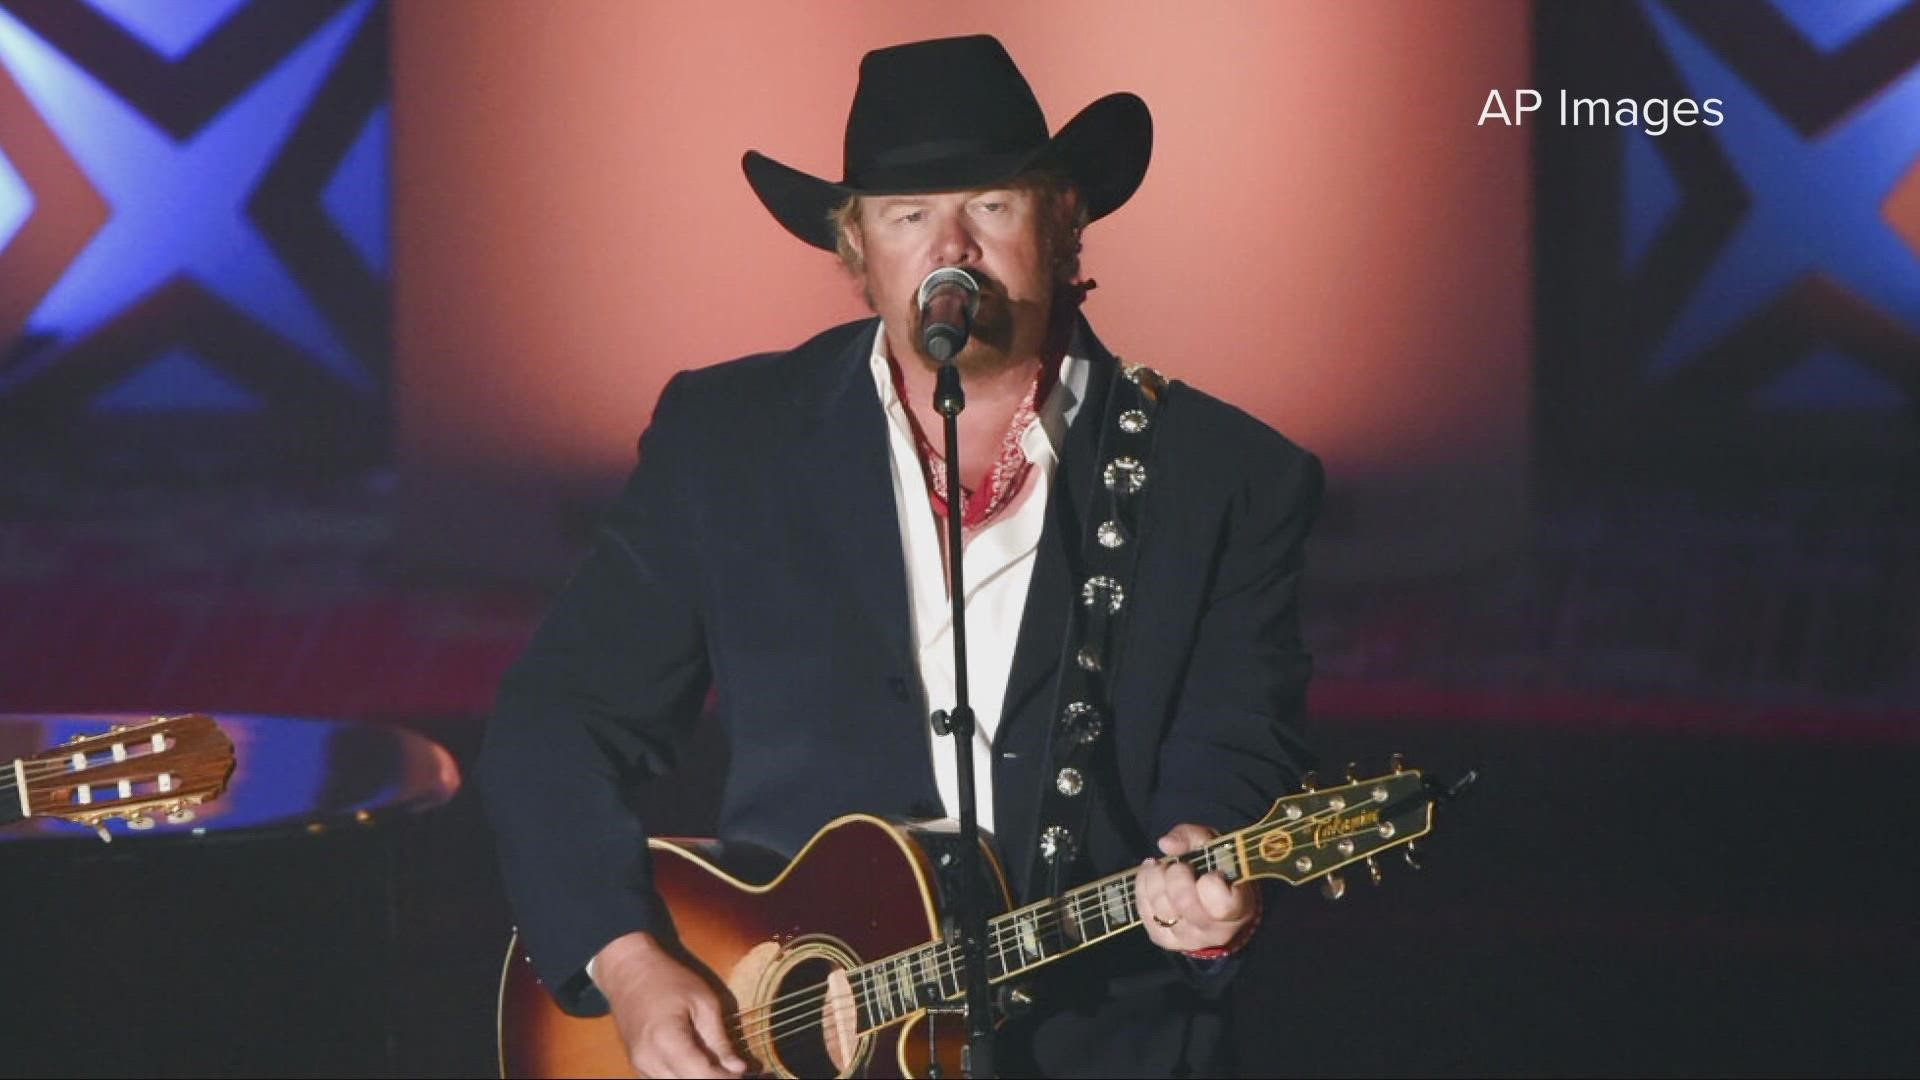 The Country star revealed he had been undergoing treatment for stomach cancer since last fall.